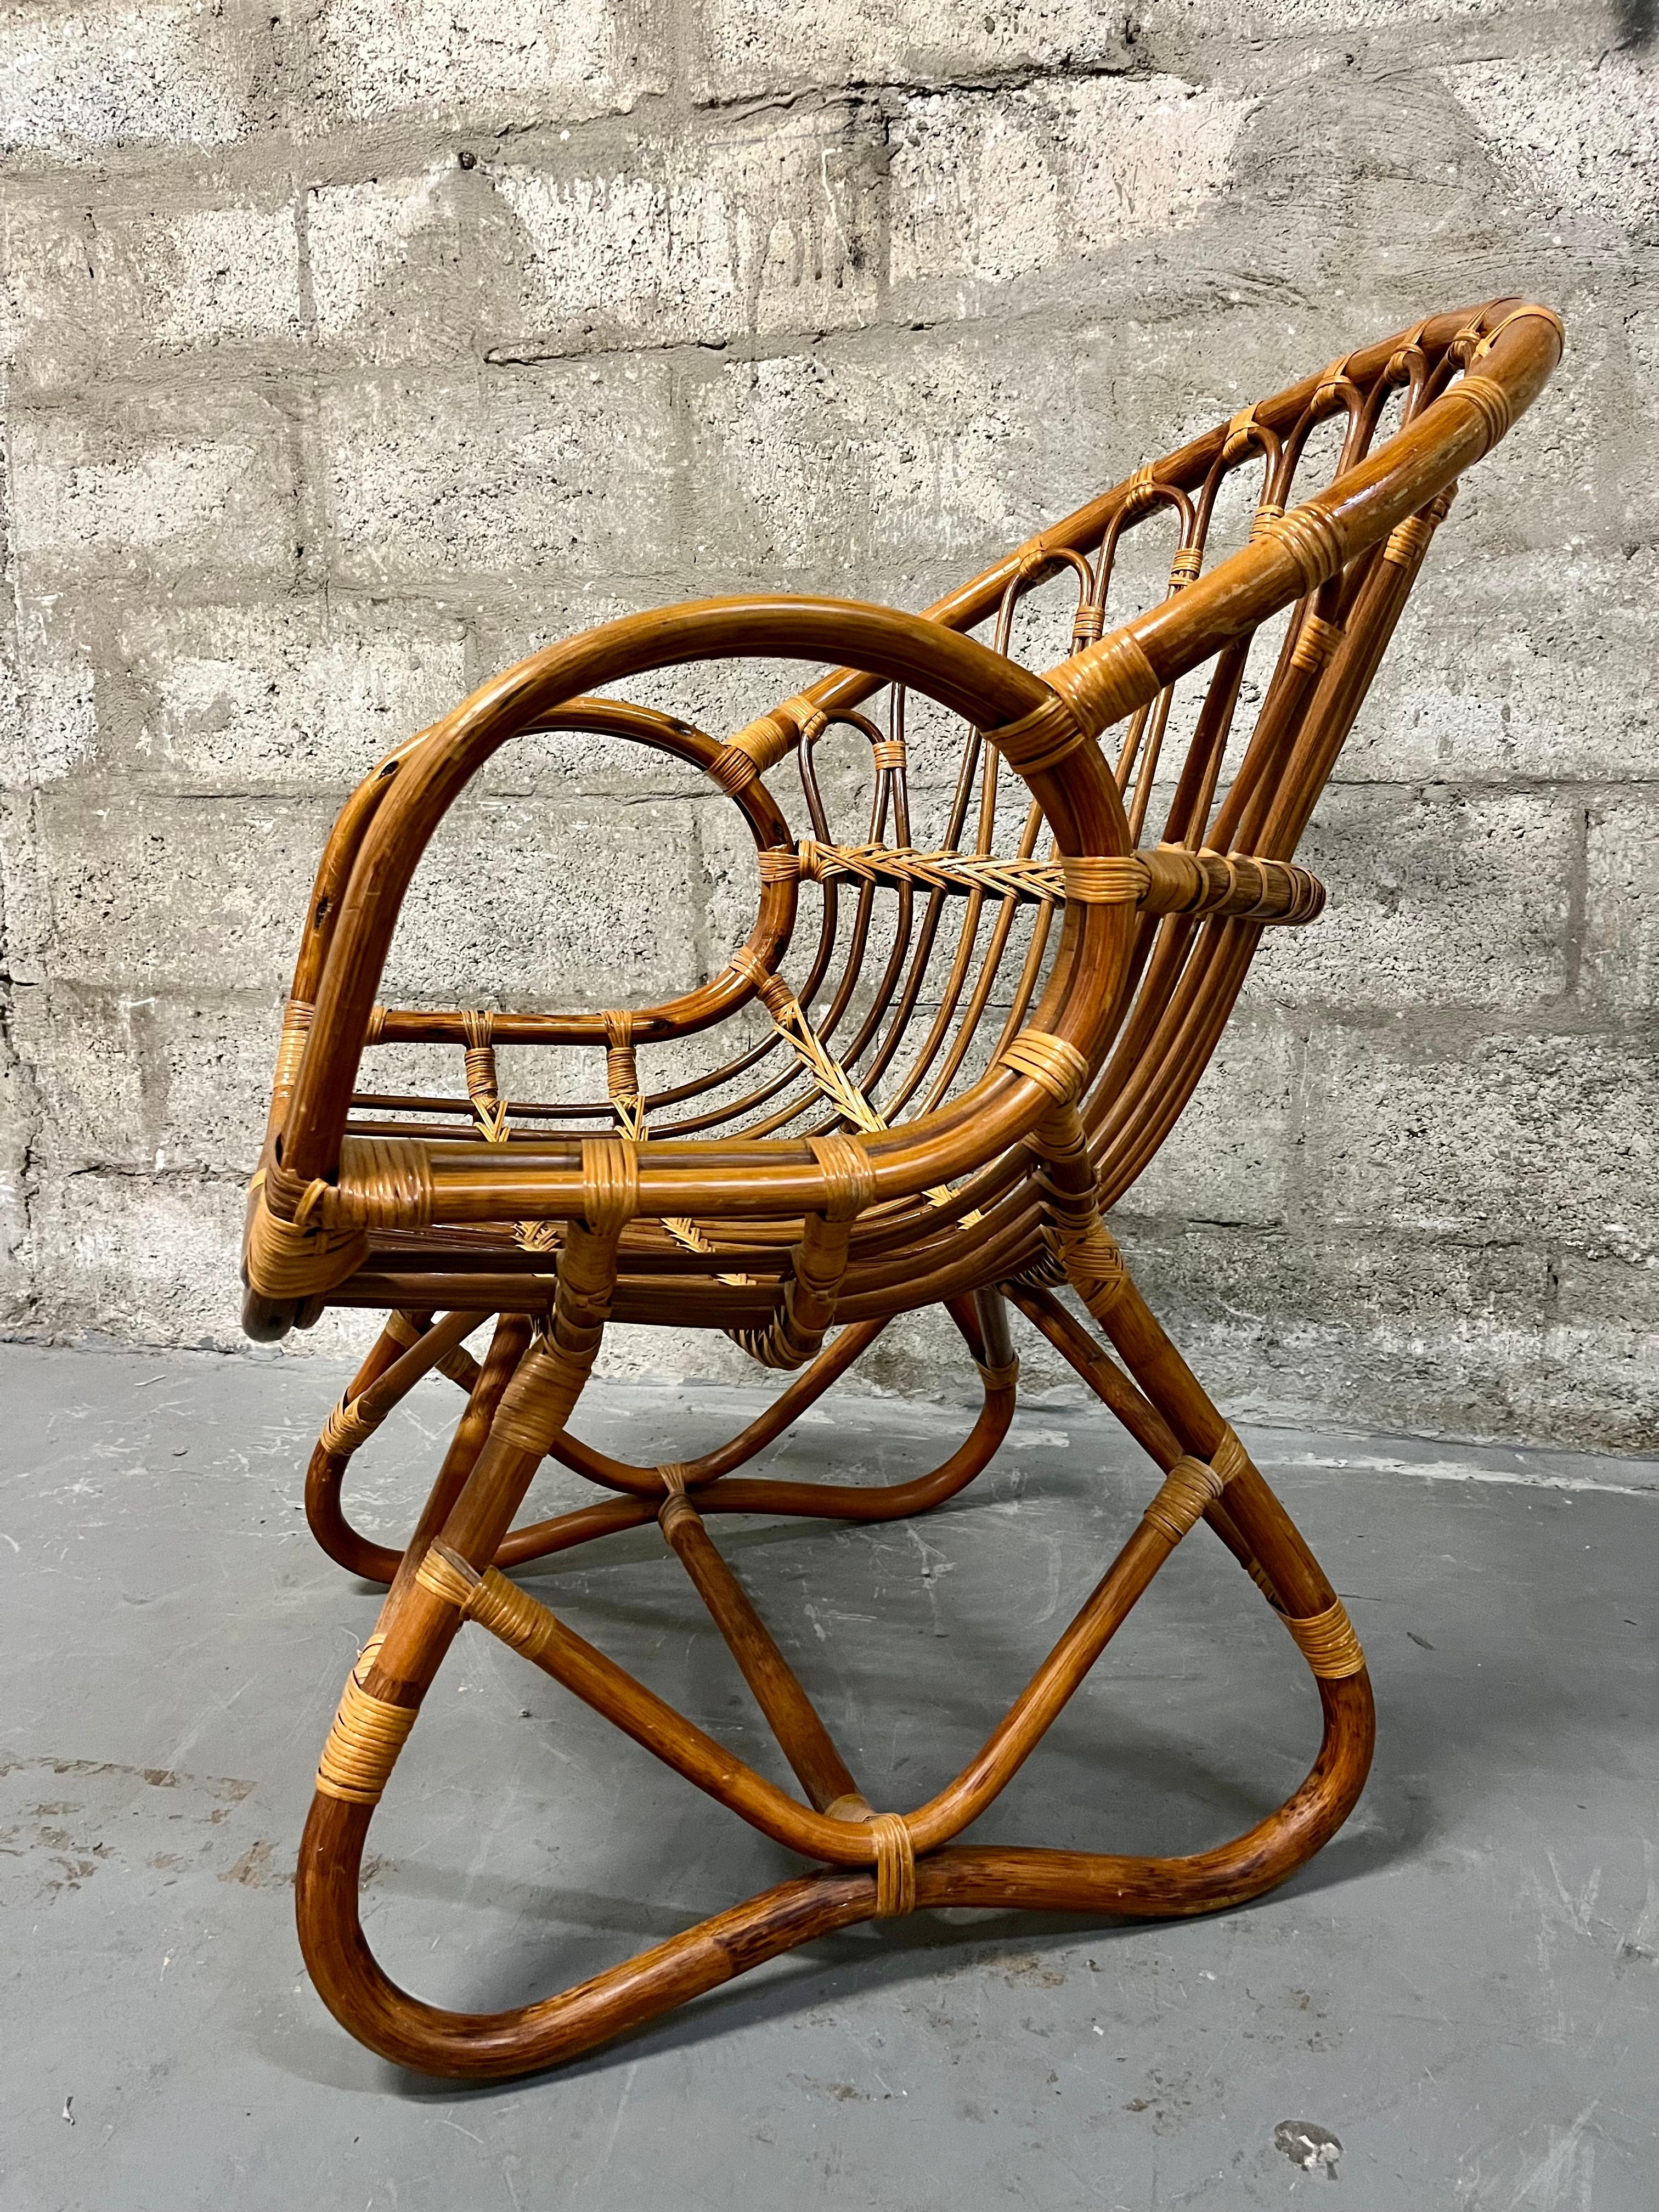 Unknown Mid Century Modern Rattan Lounge Chair in the Franco Albini's Style. Circa 1970s